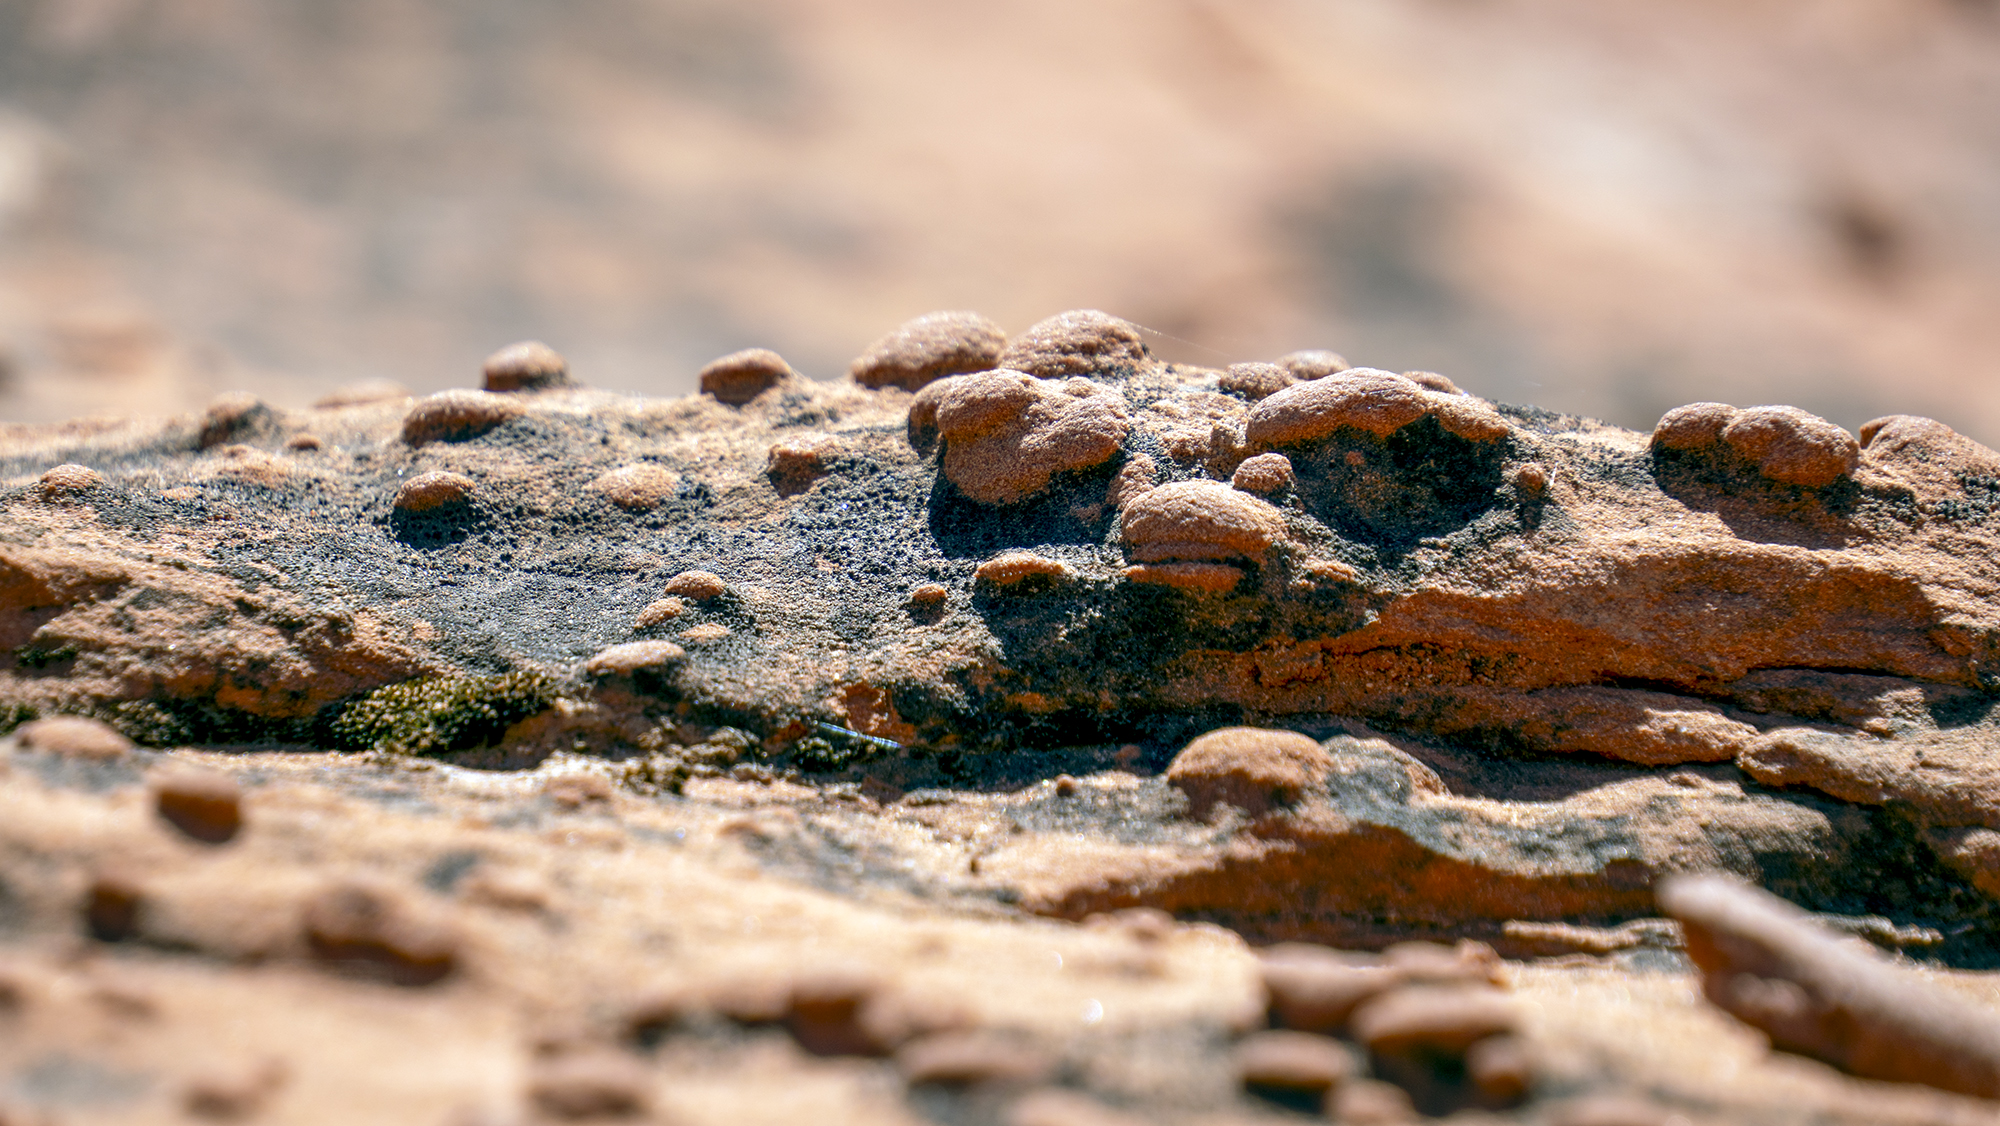 Rockhounding in Southern Utah: What do you need to know? – St George News